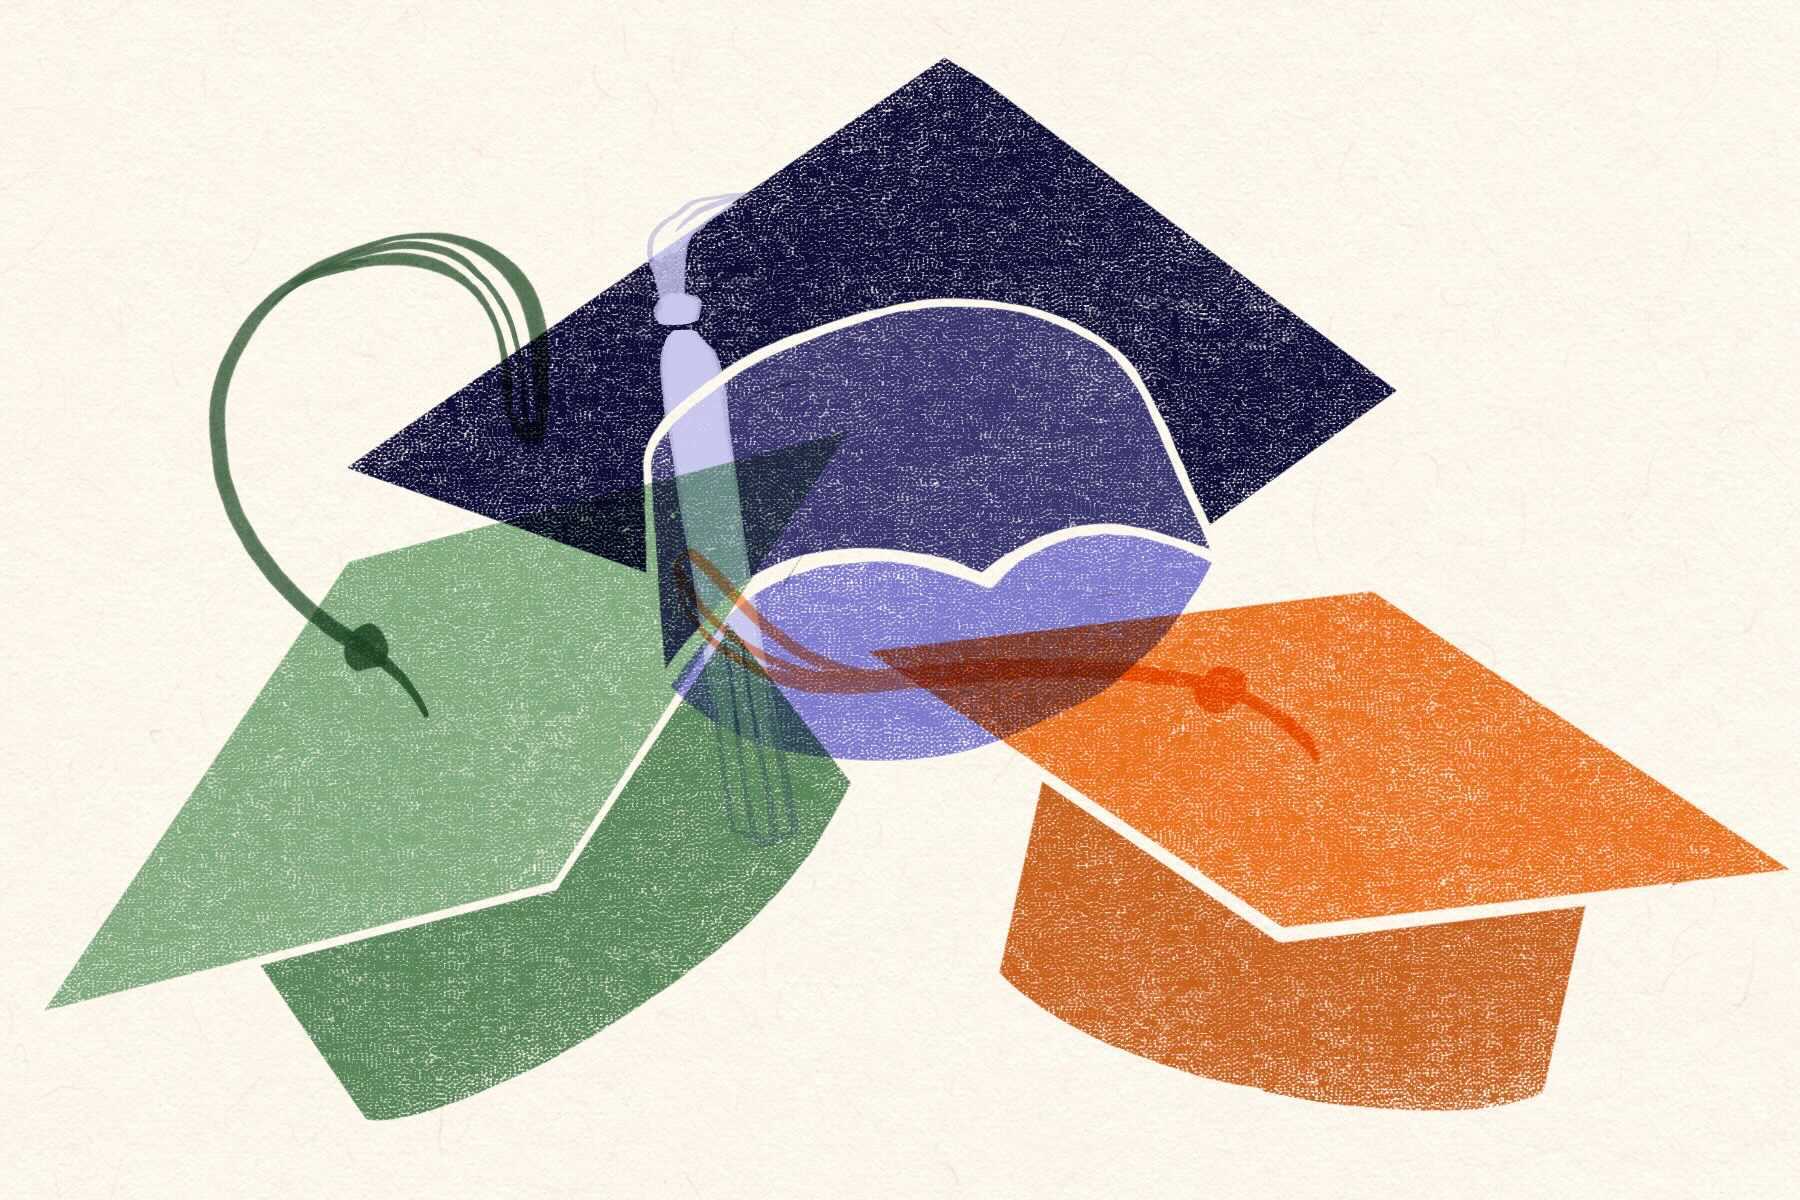 in an article about graduate school, an illustration of three mortarboards